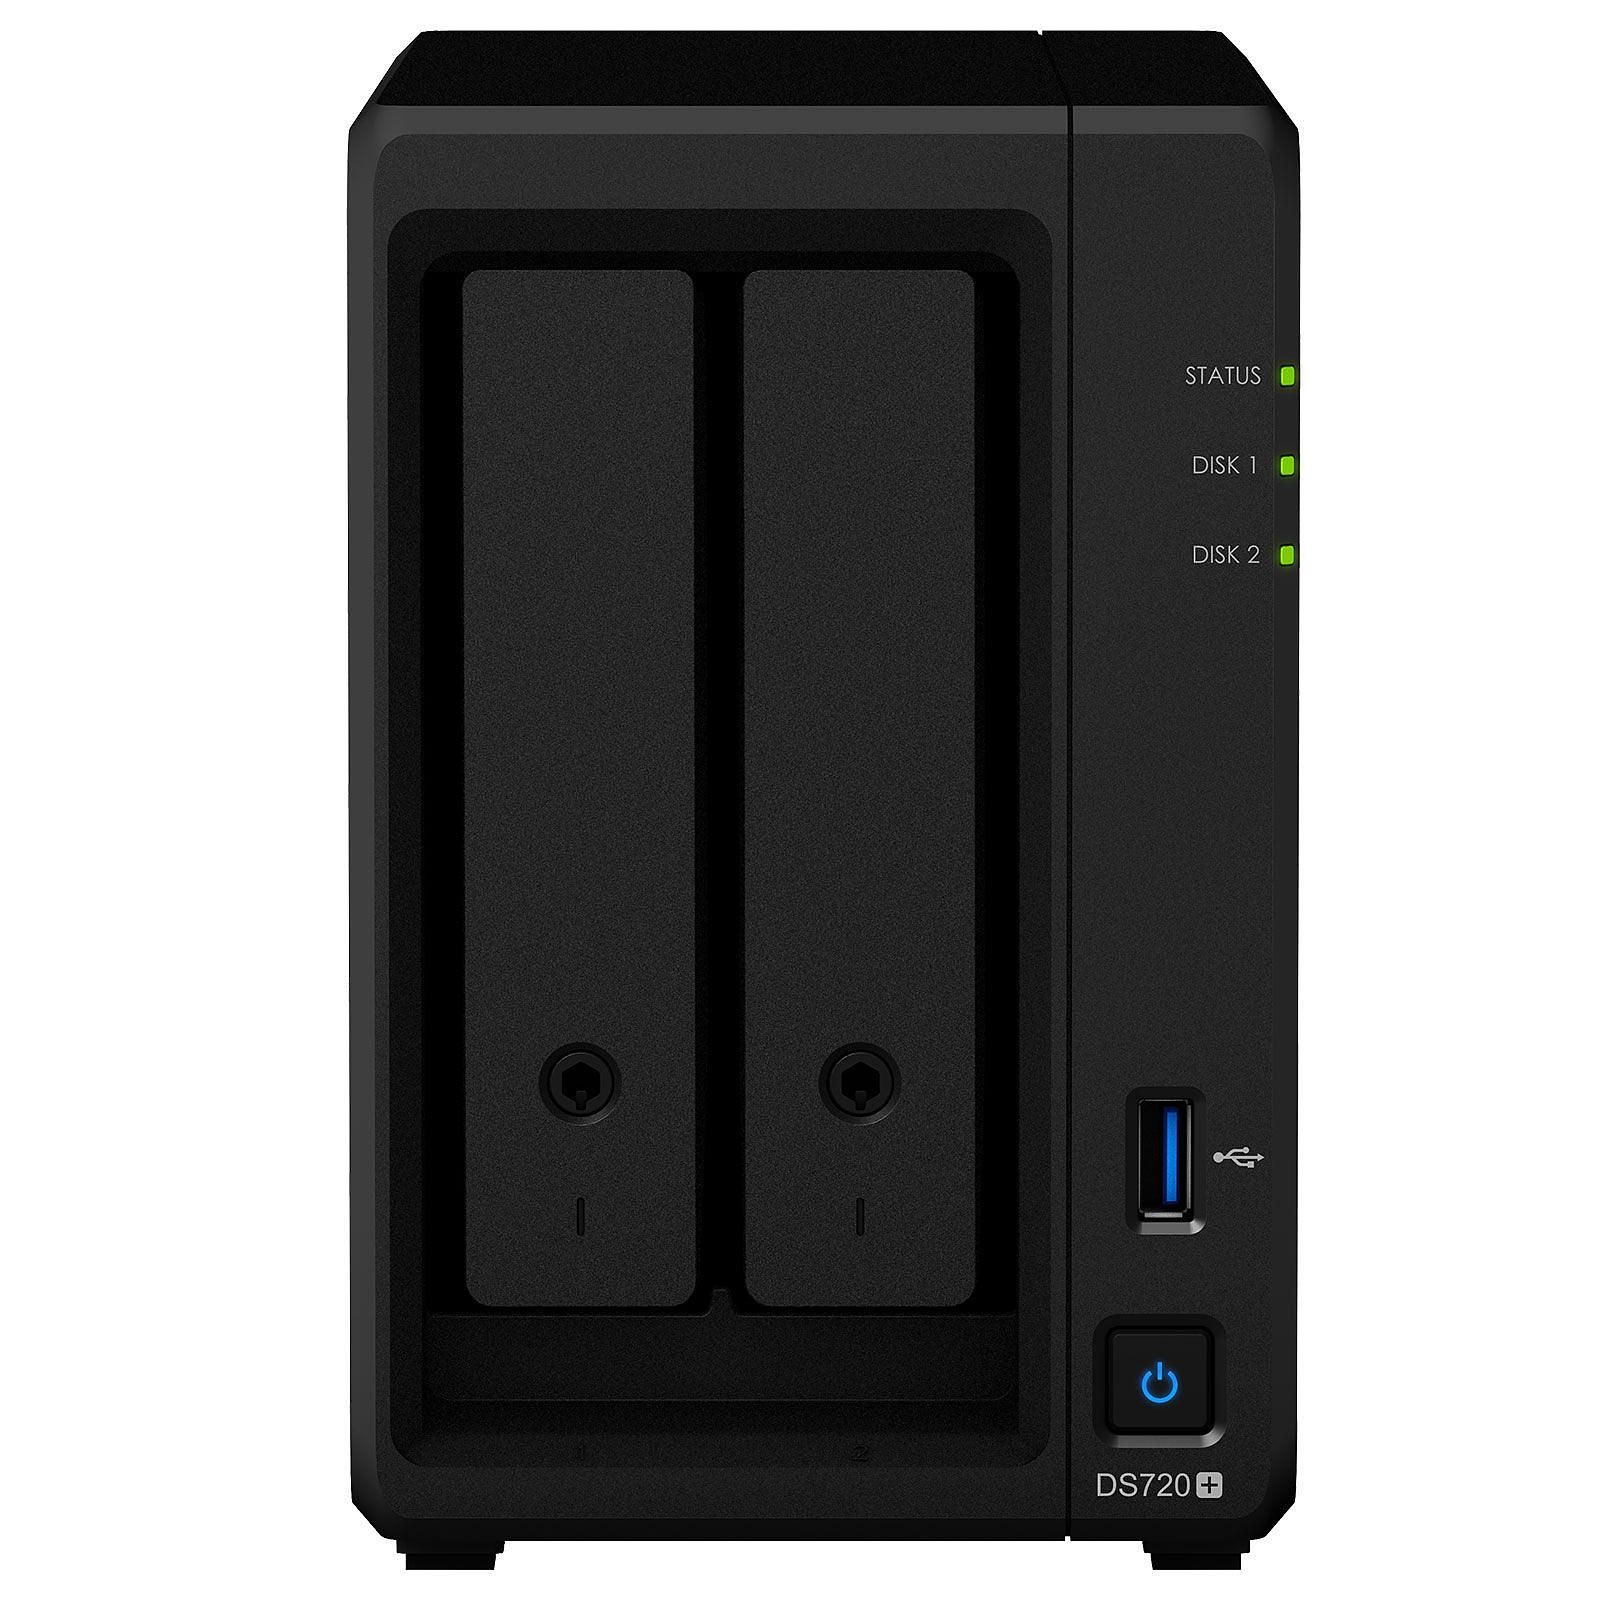 Serveur NAS Synology DS720+ - 2 HDD